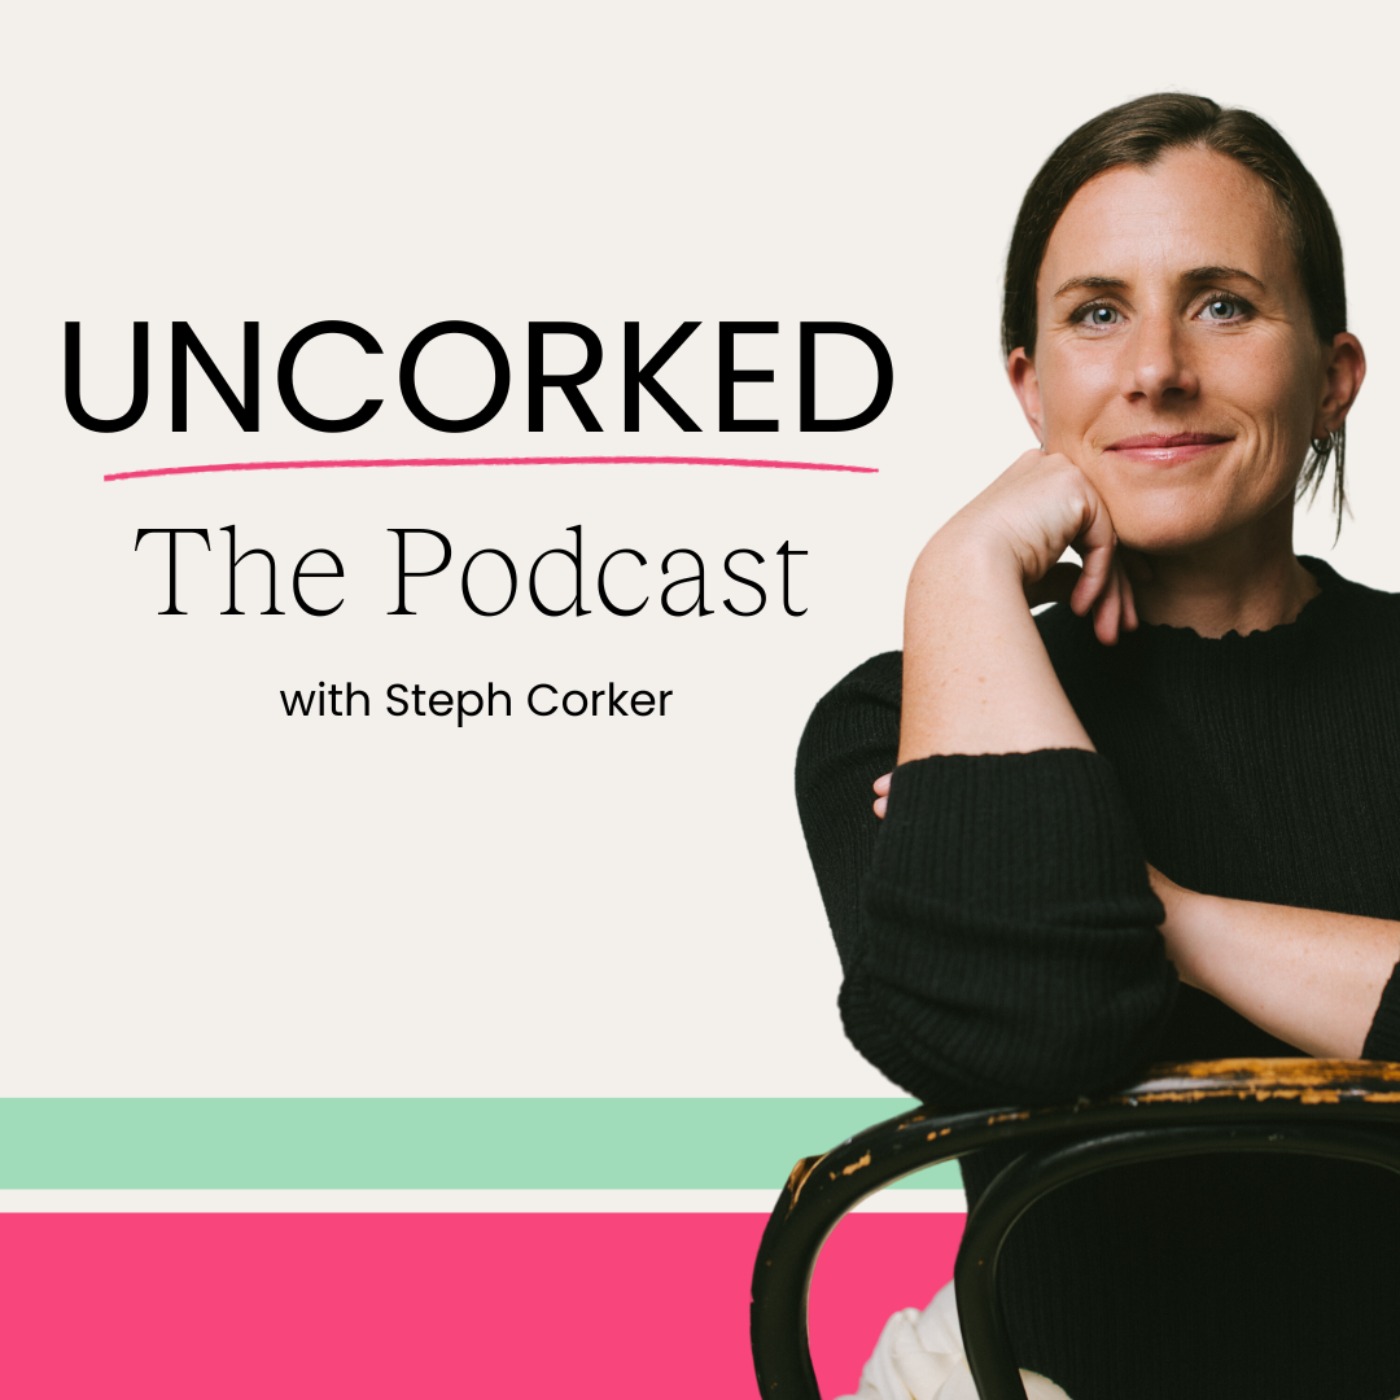 Uncorked: The Podcast